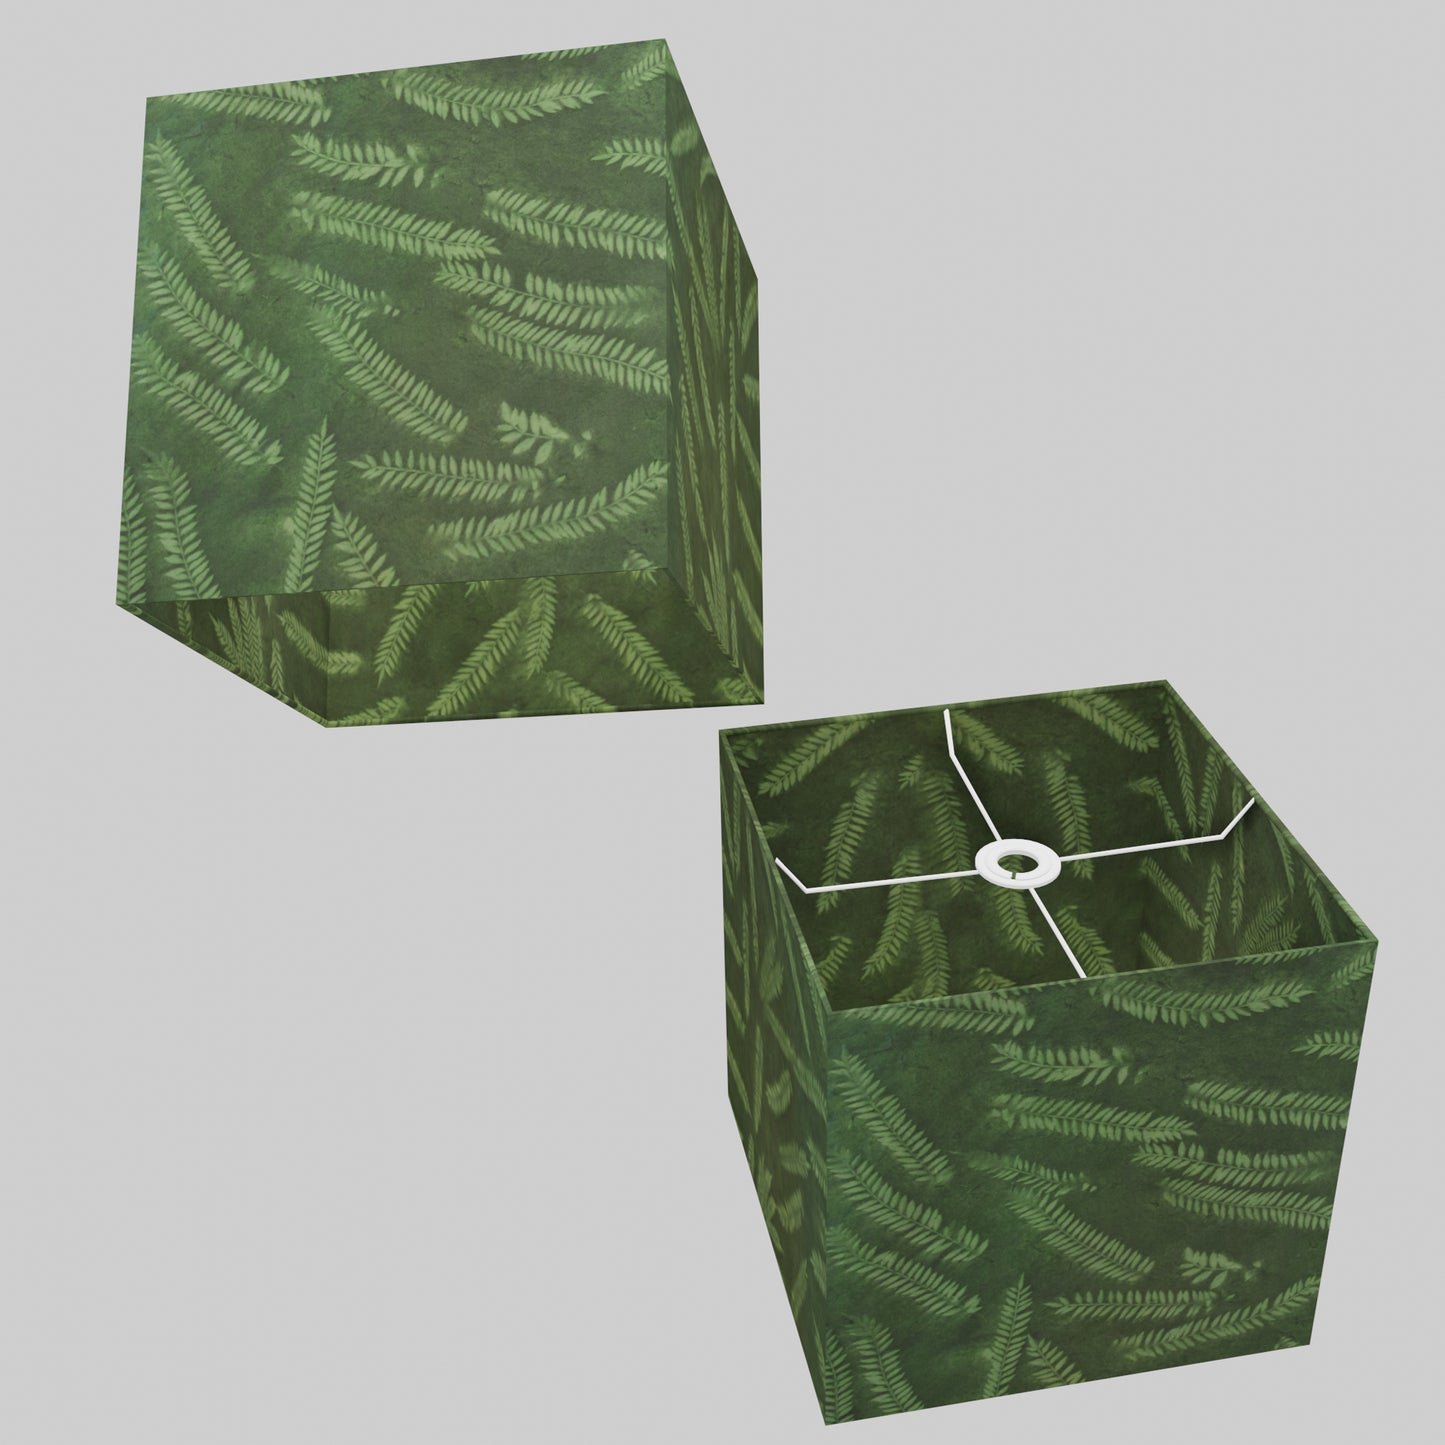 Square Lamp Shade - P27 - Resistance Dyed Green Fern, 30cm(w) x 30cm(h) x 30cm(d)